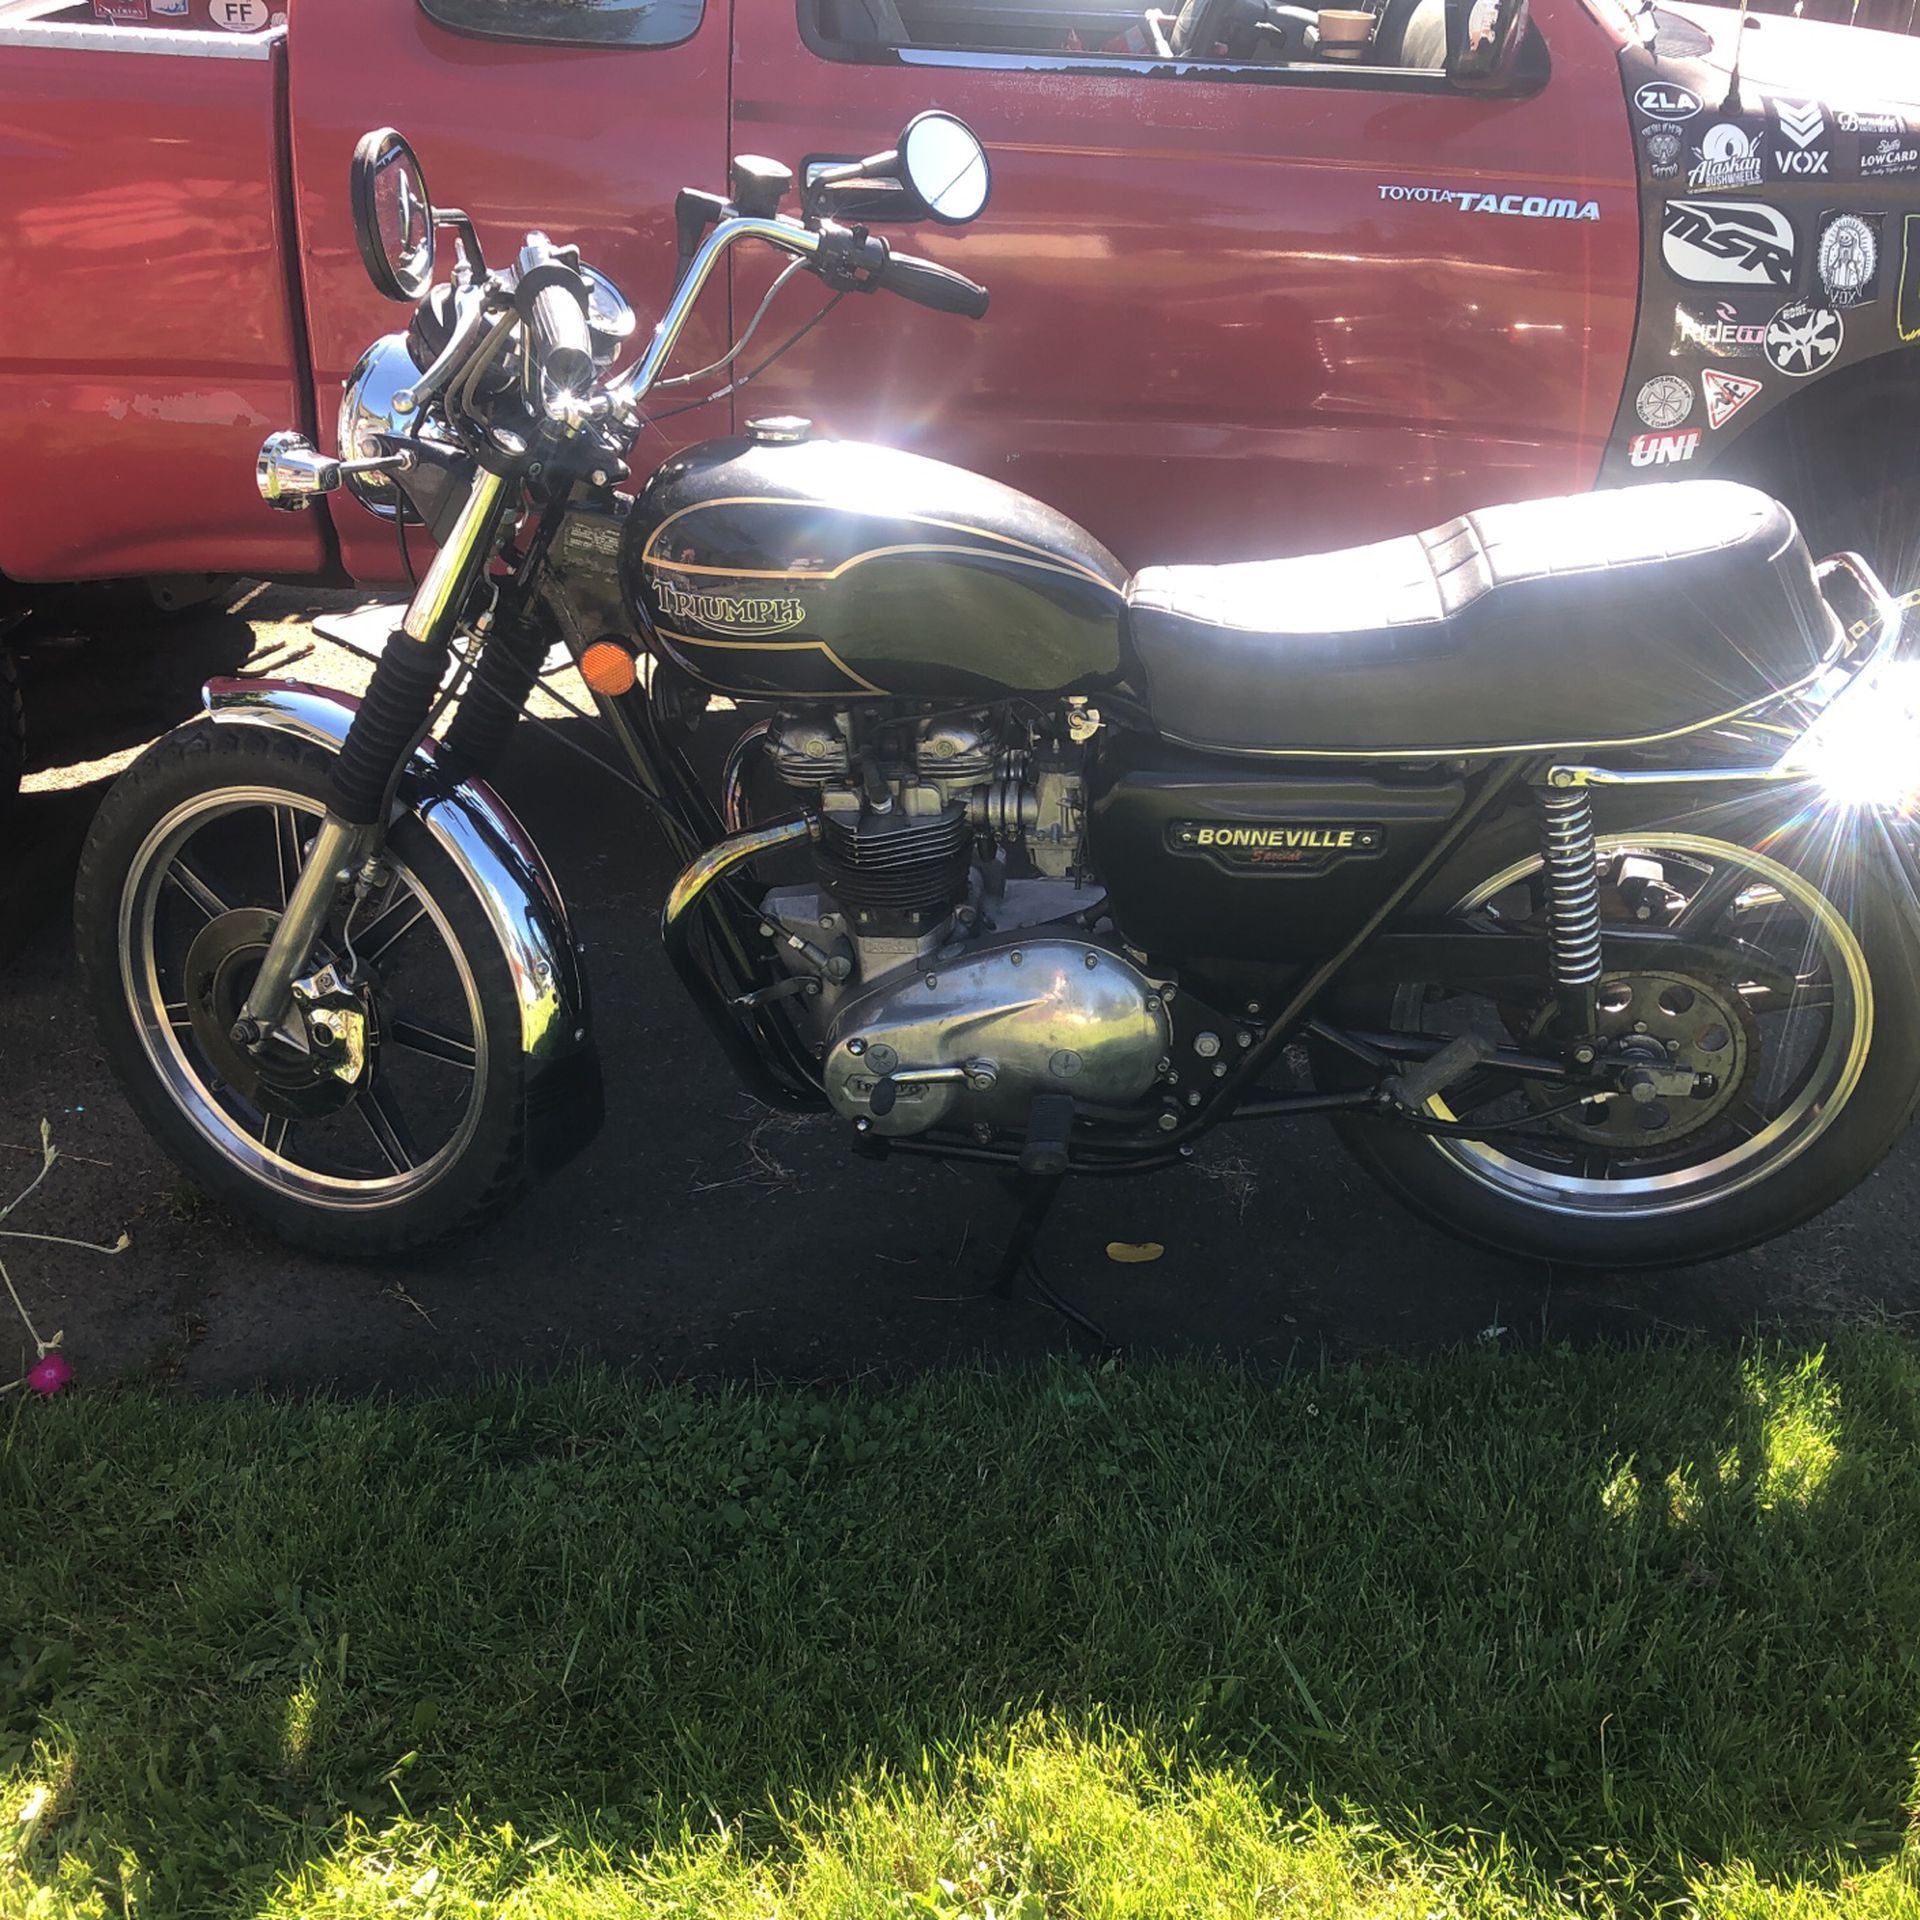 1979 Triumph T-140D Bonneville Special 8401 miles Properly Stores Getting New battery & Gas Have Title